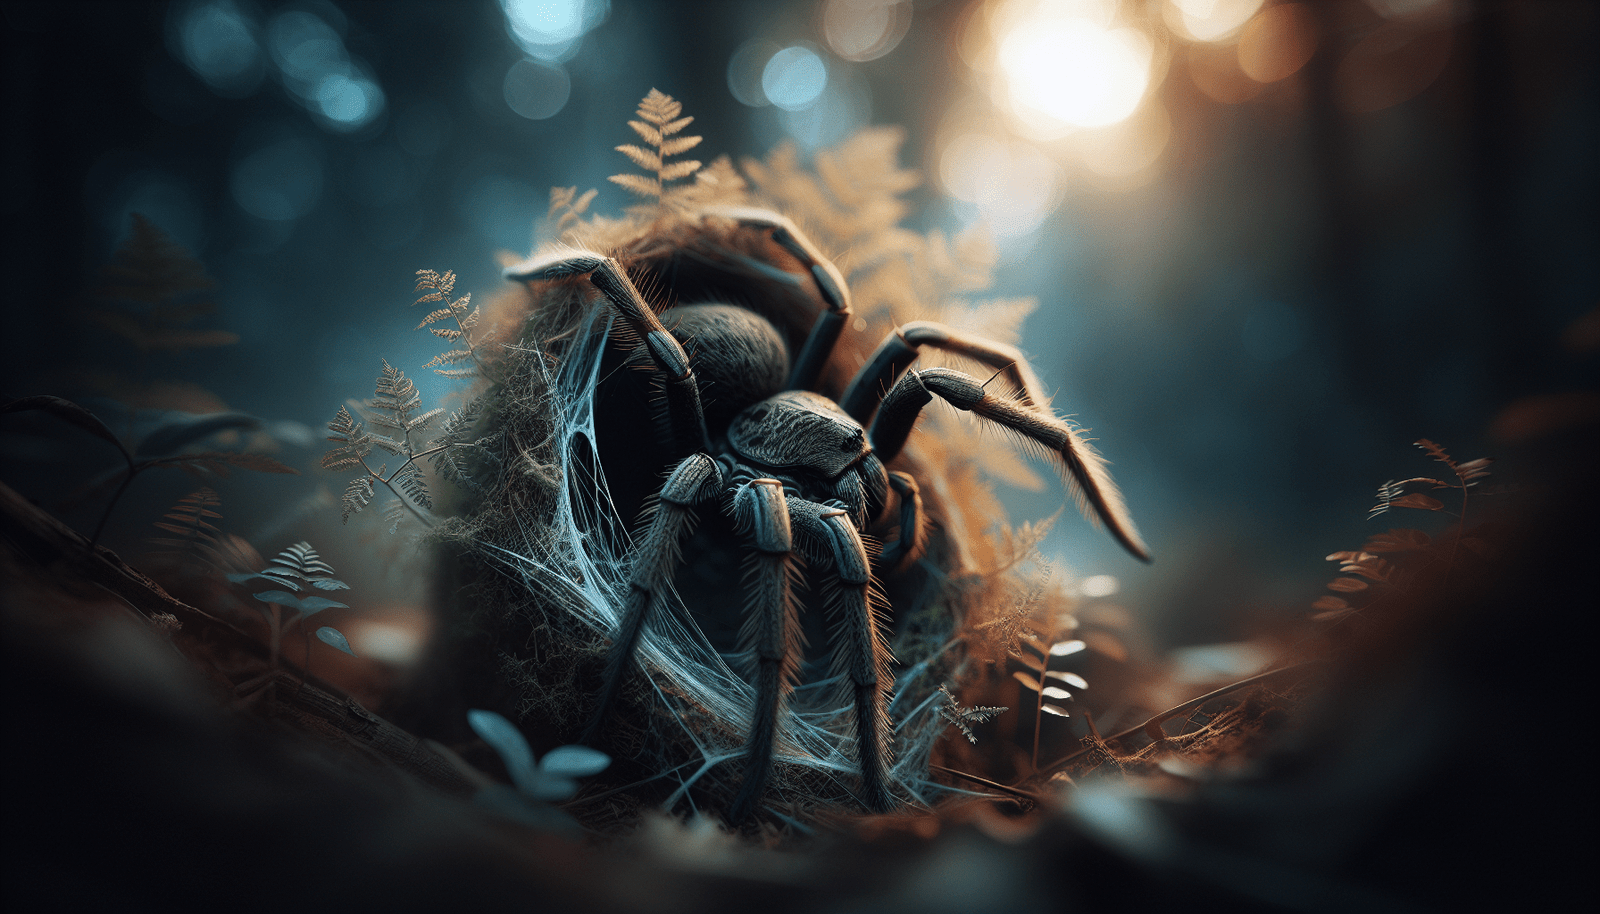 Can You Discuss The Characteristics And Care Requirements Of The Elusive Trapdoor Spider?